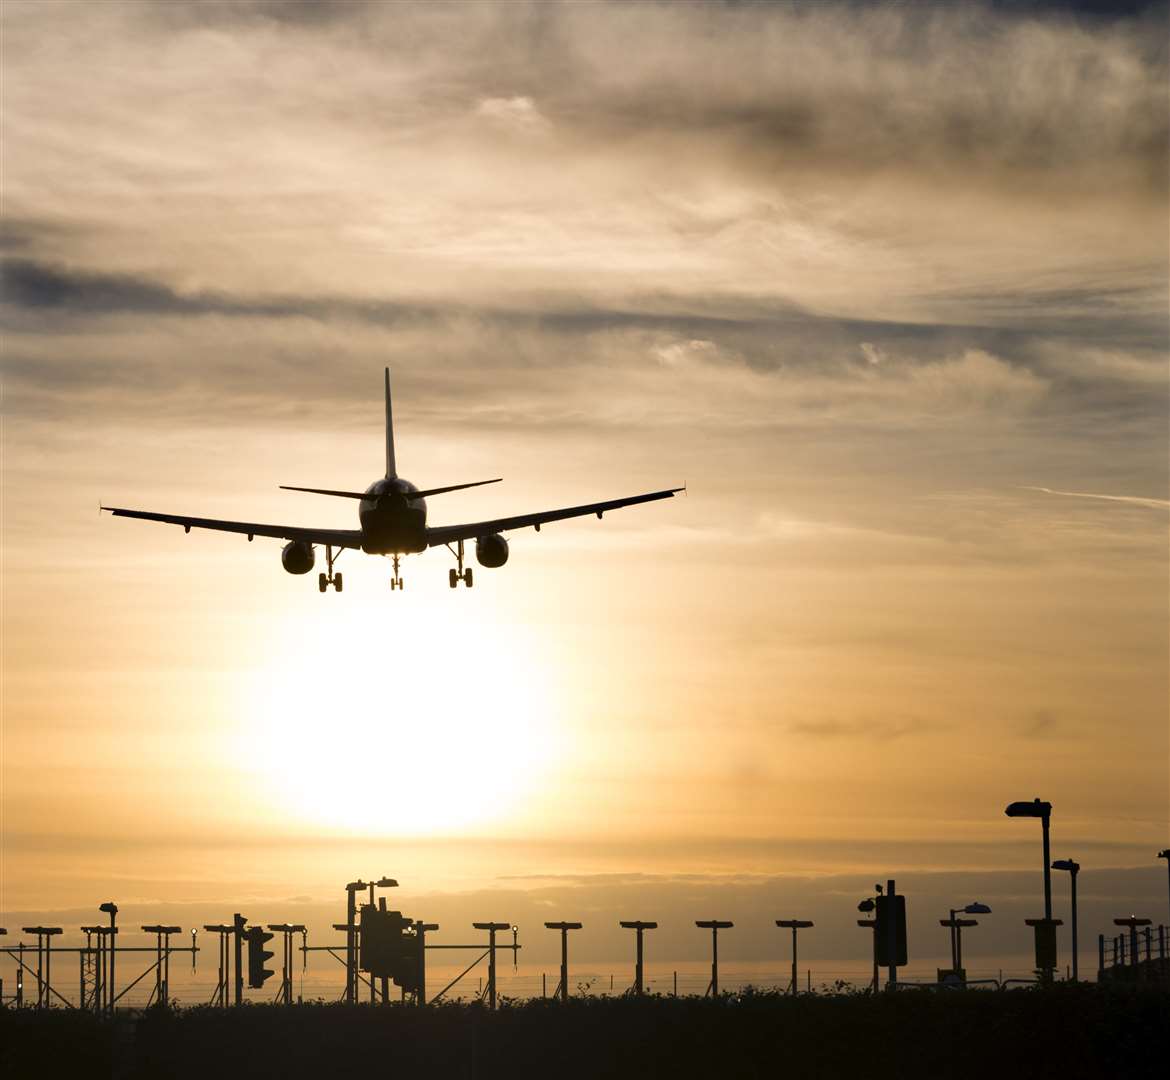 He had gone for a job at Heathrow Airport. Picture: iStock